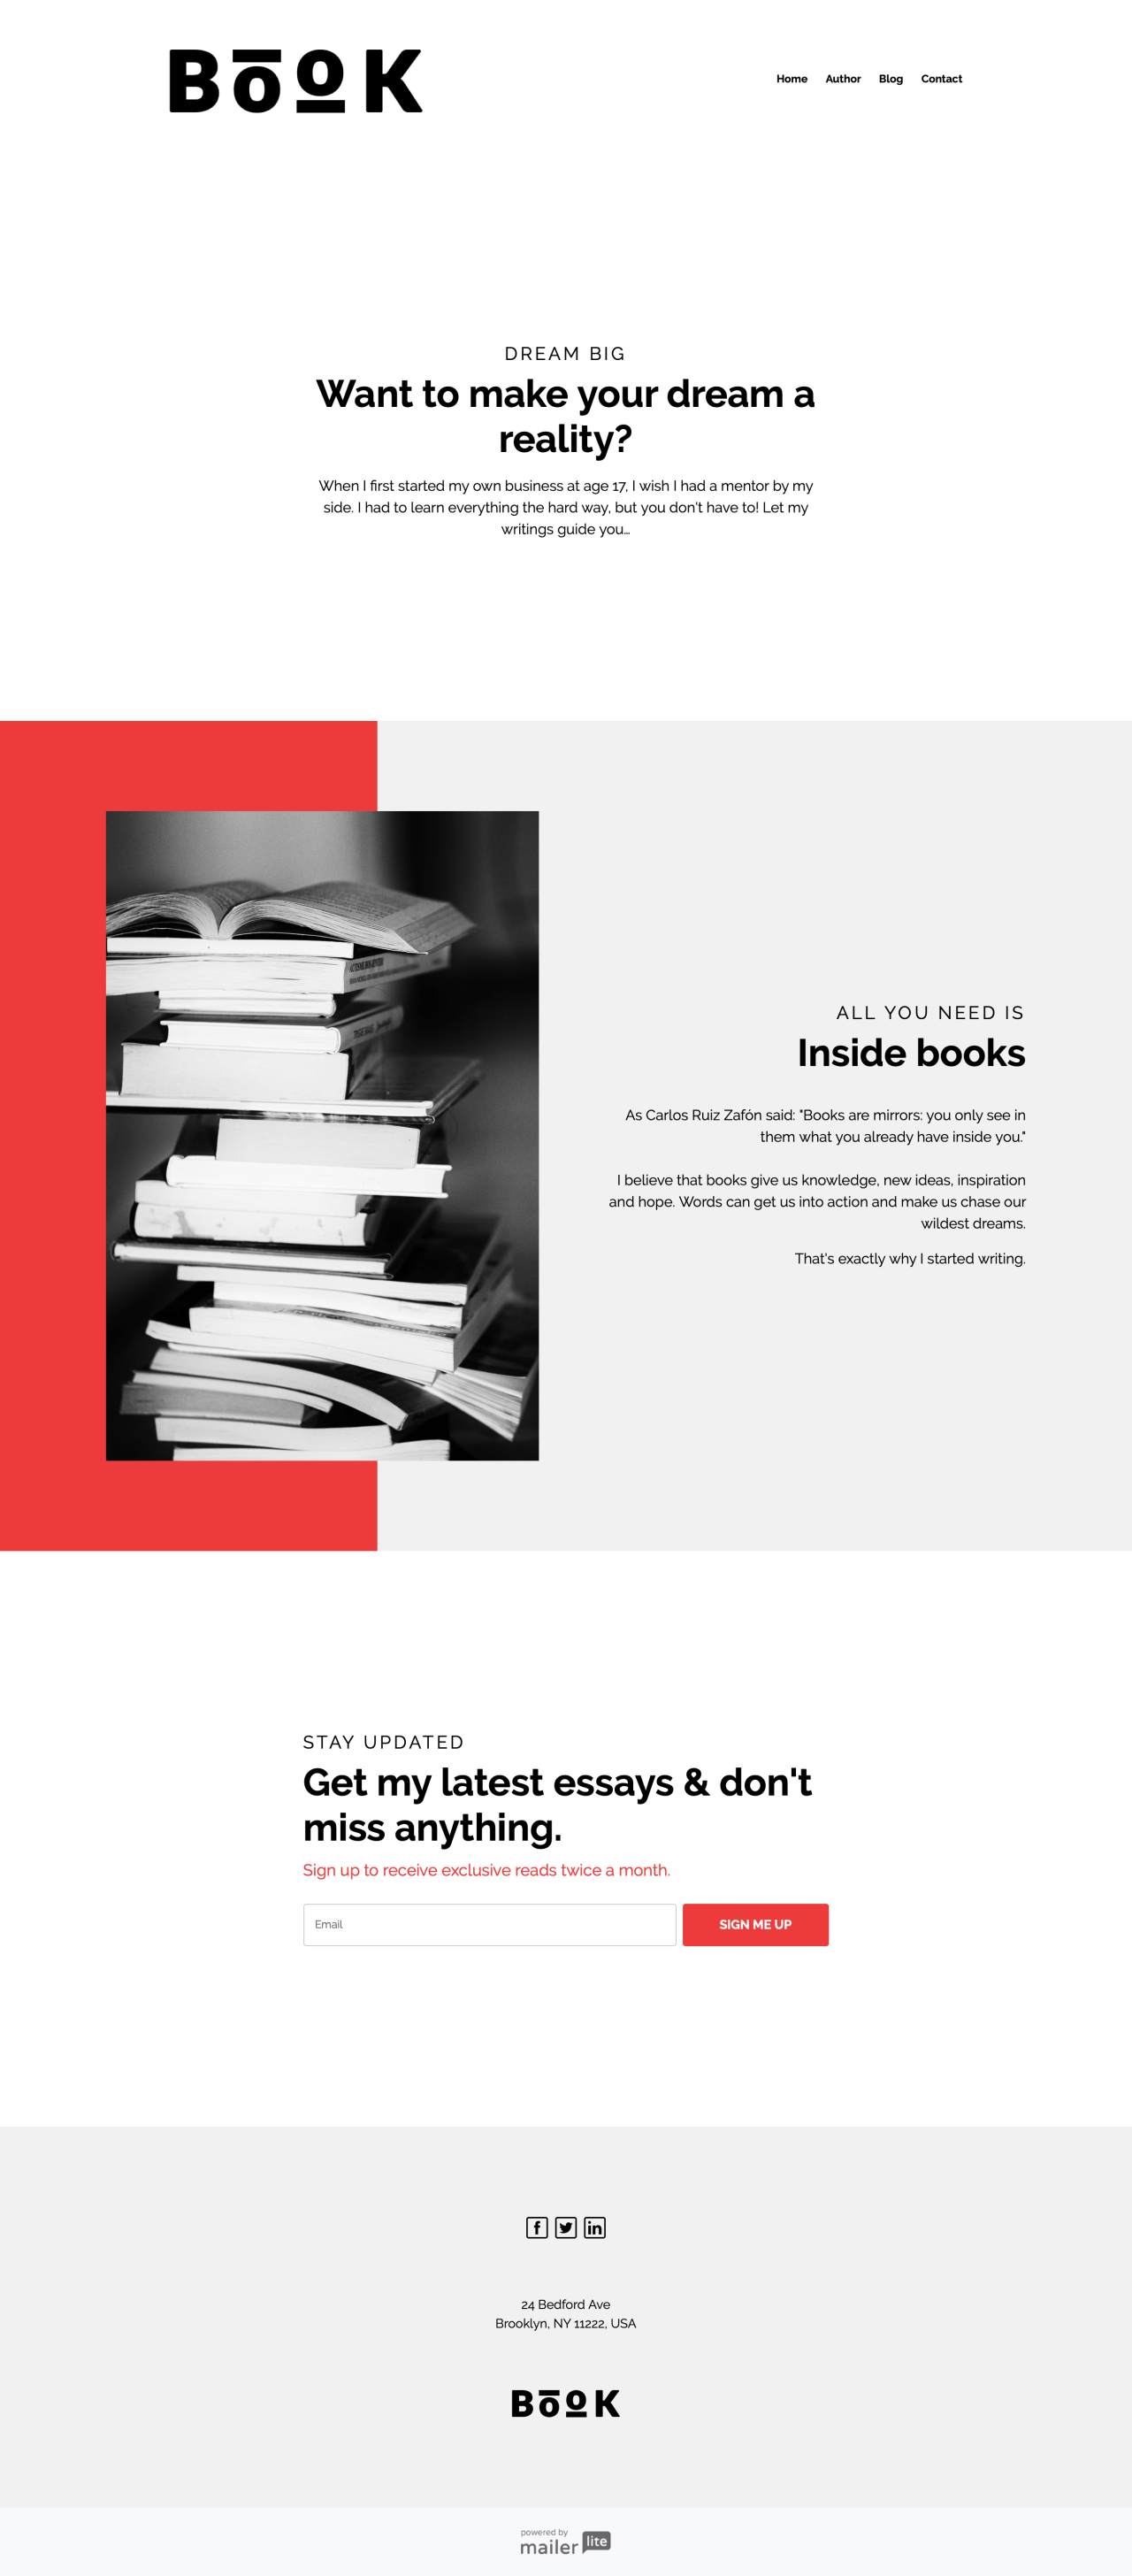 Author book template - Made by MailerLite